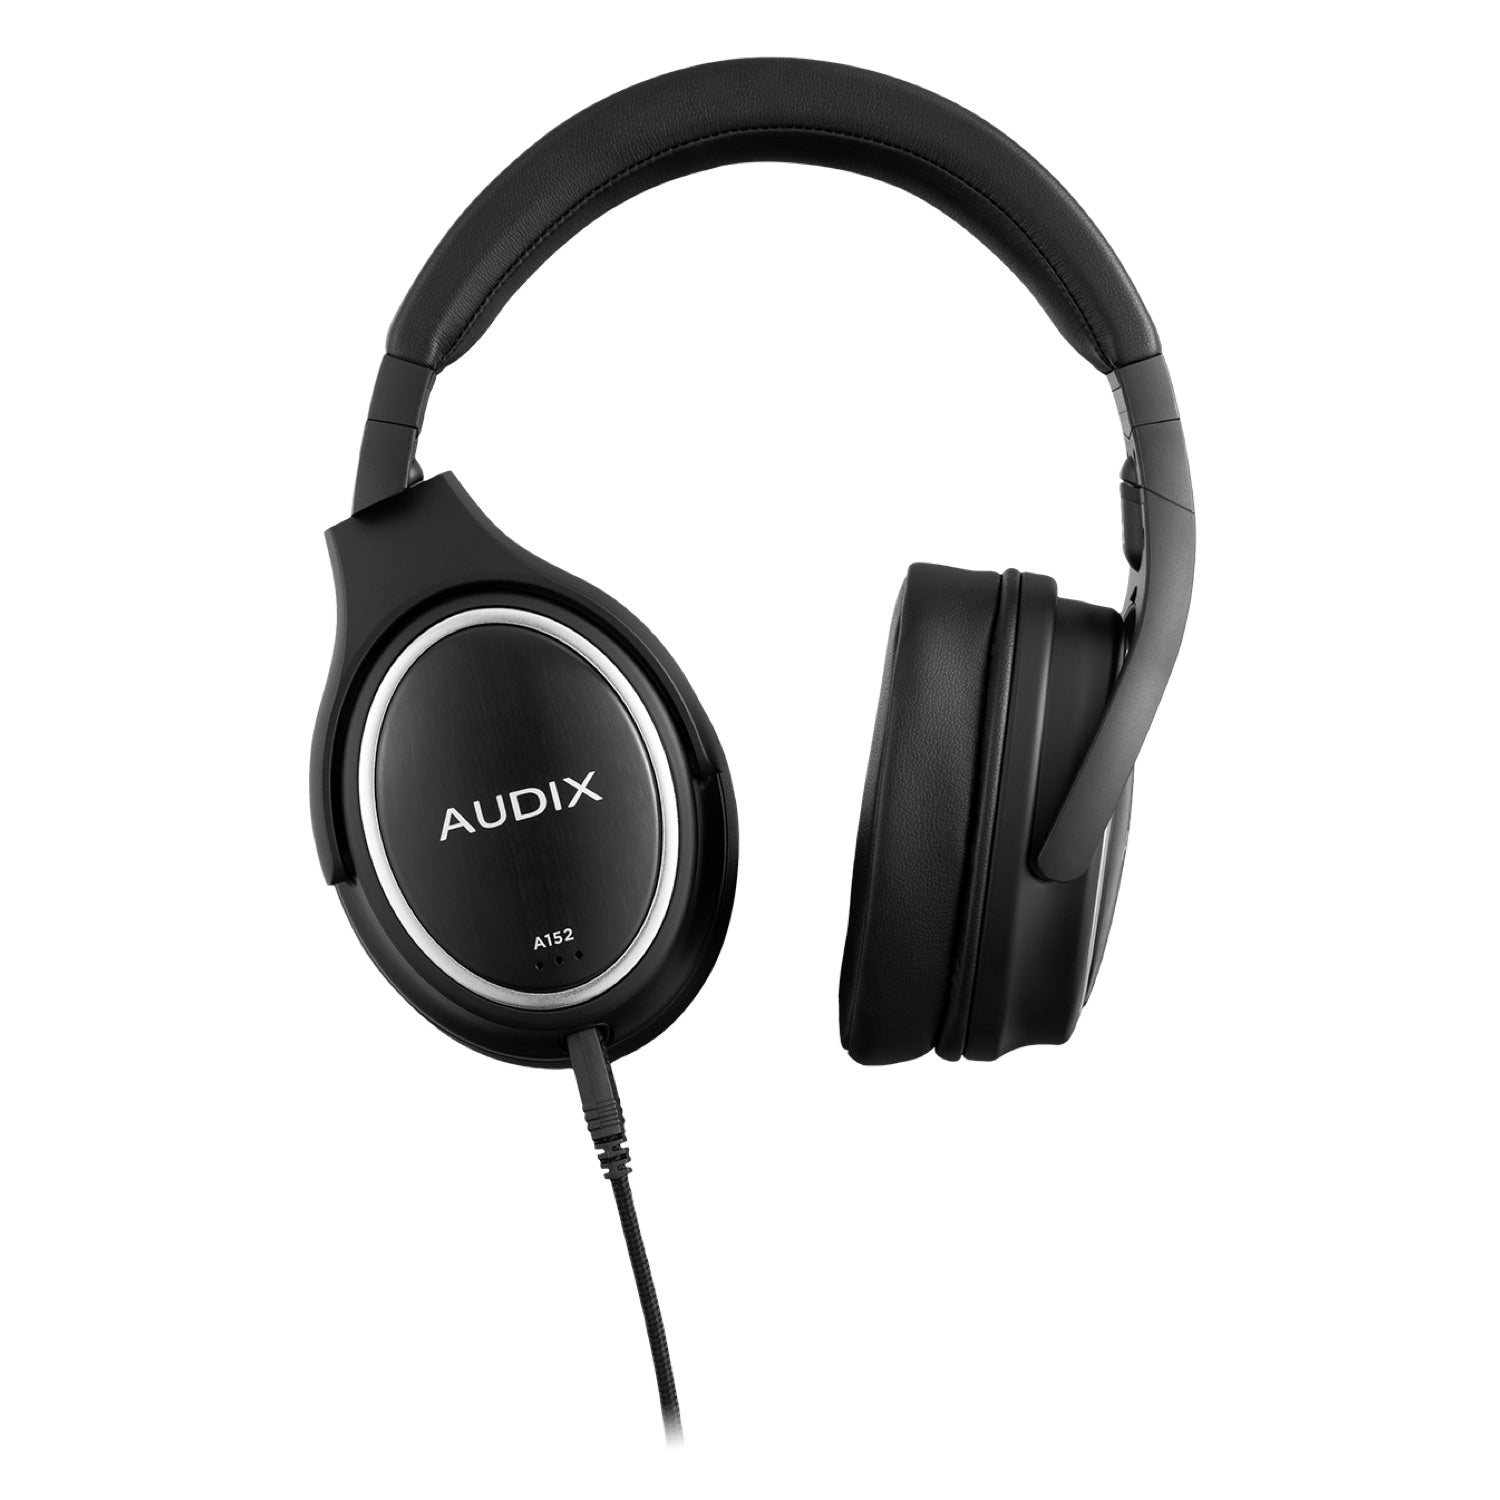 Audix A152 - Studio Reference Headphones with Extended Bass, earcups